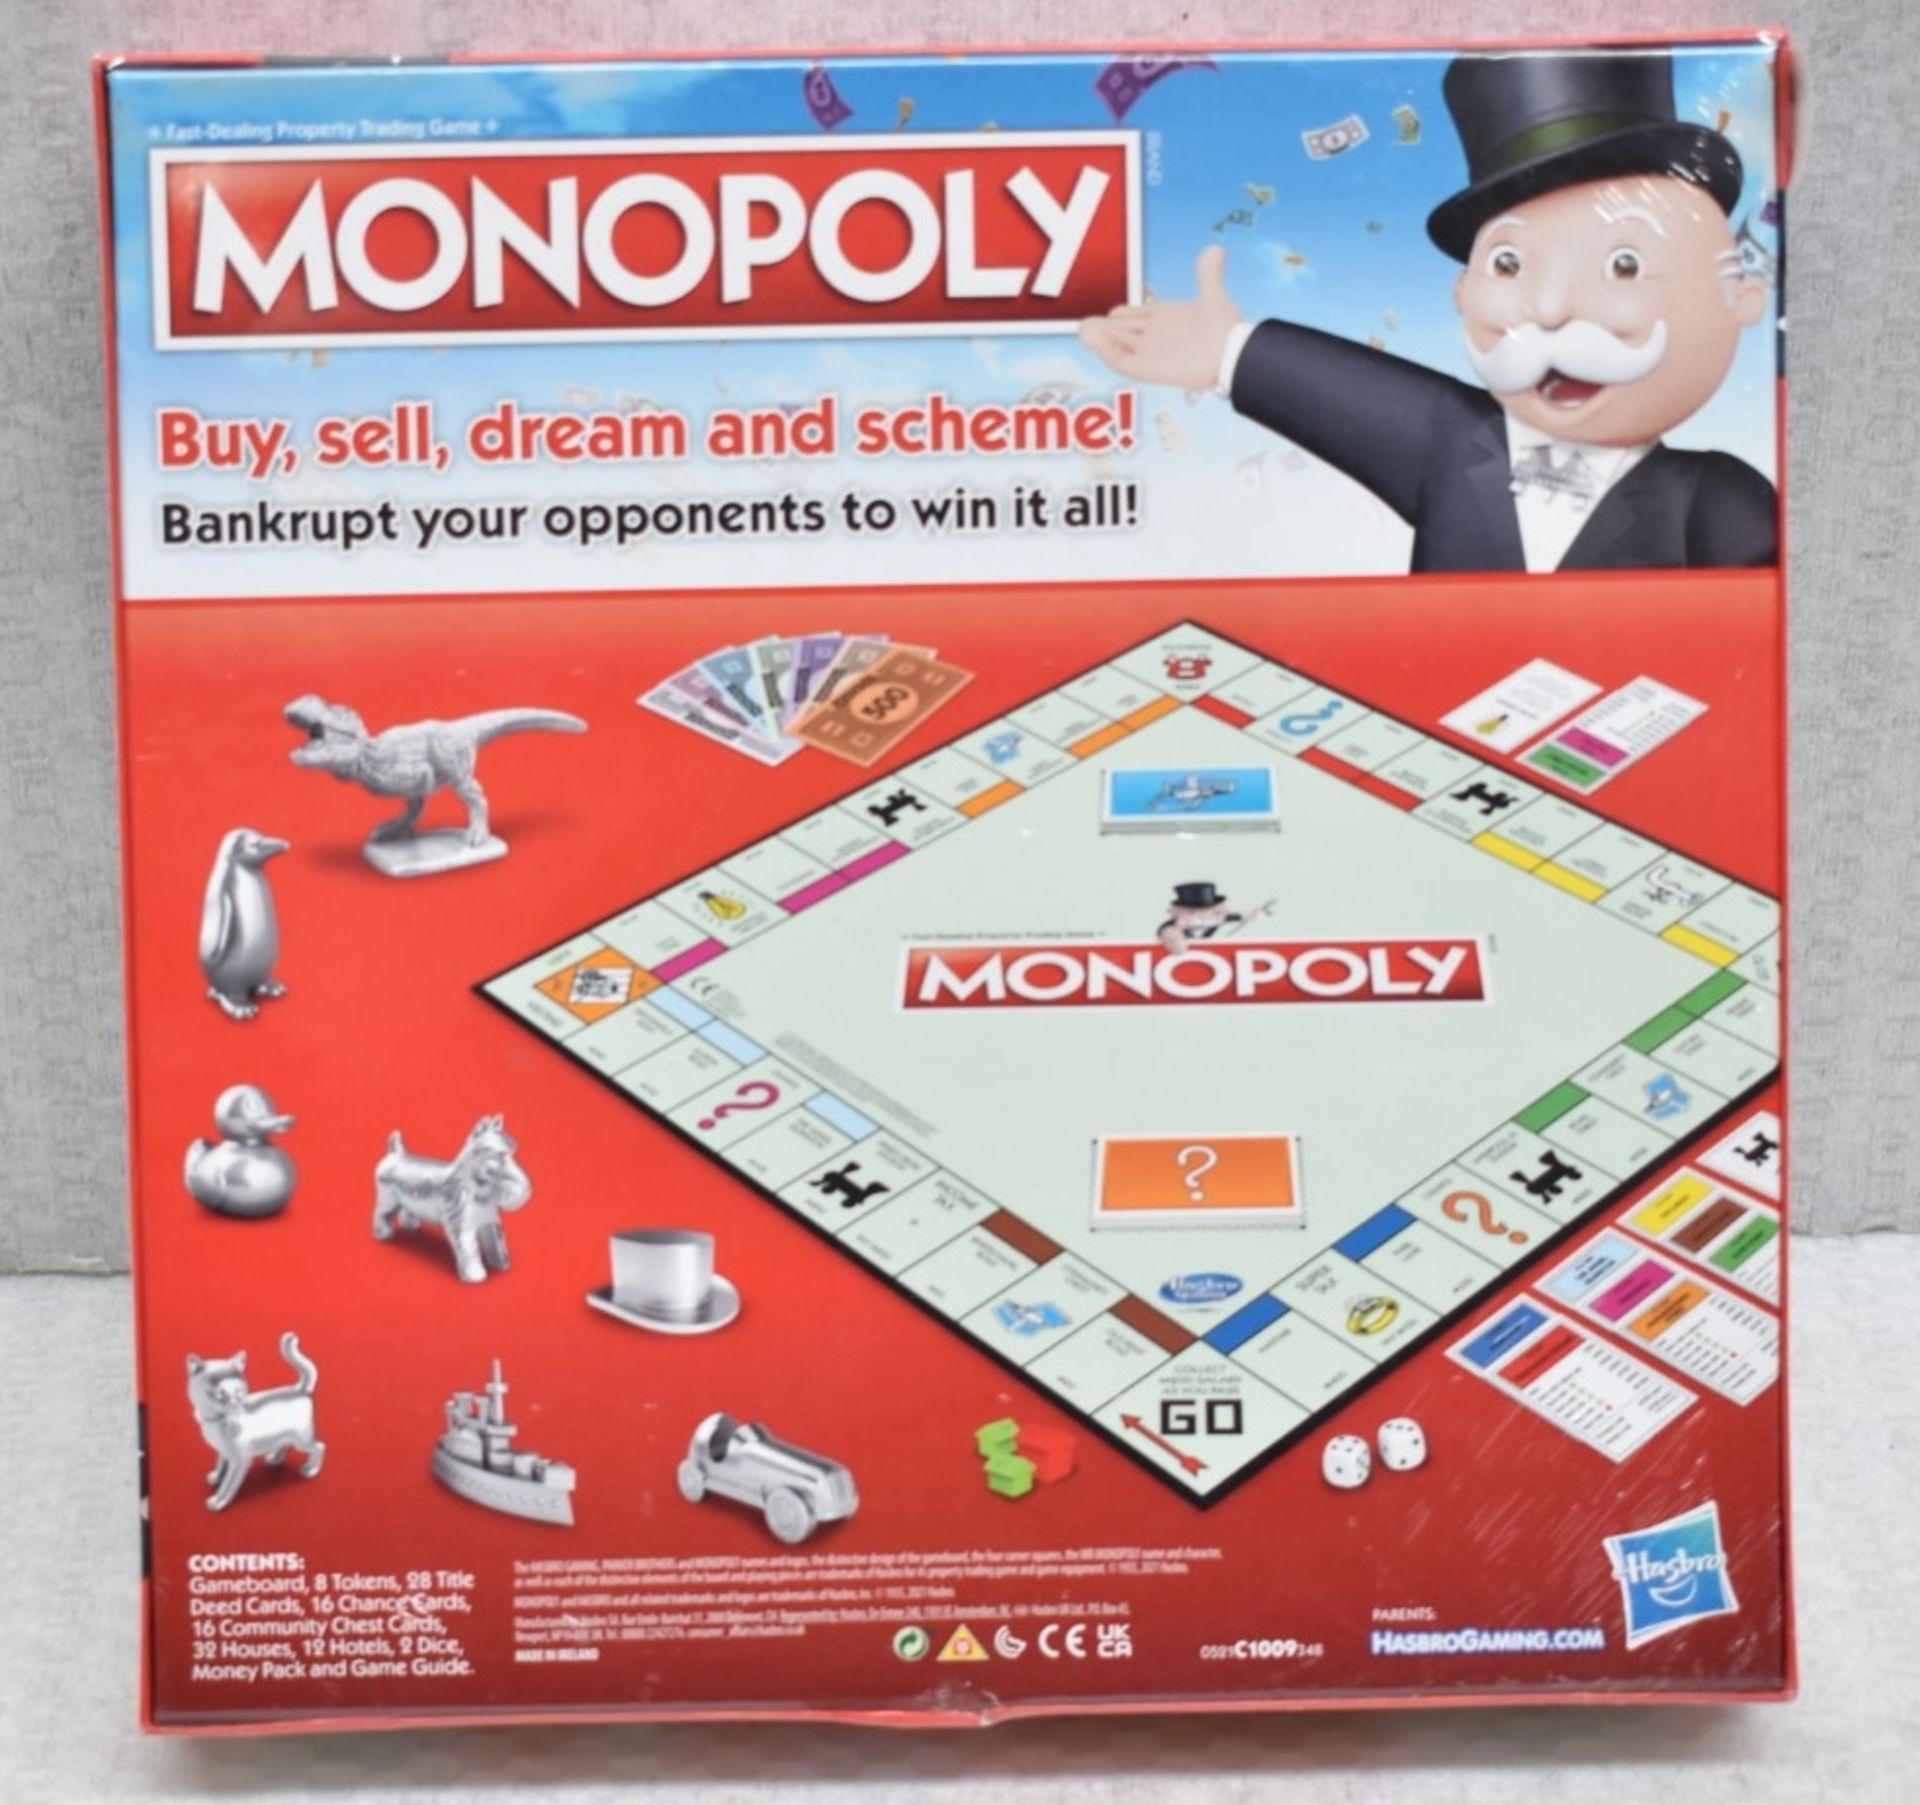 1 x MONOPOLY BOARD GAME - Unused Boxed Stock - Ref: HAS2339/WH2/C11/02-23-1 - CL987 - Location: - Image 2 of 3